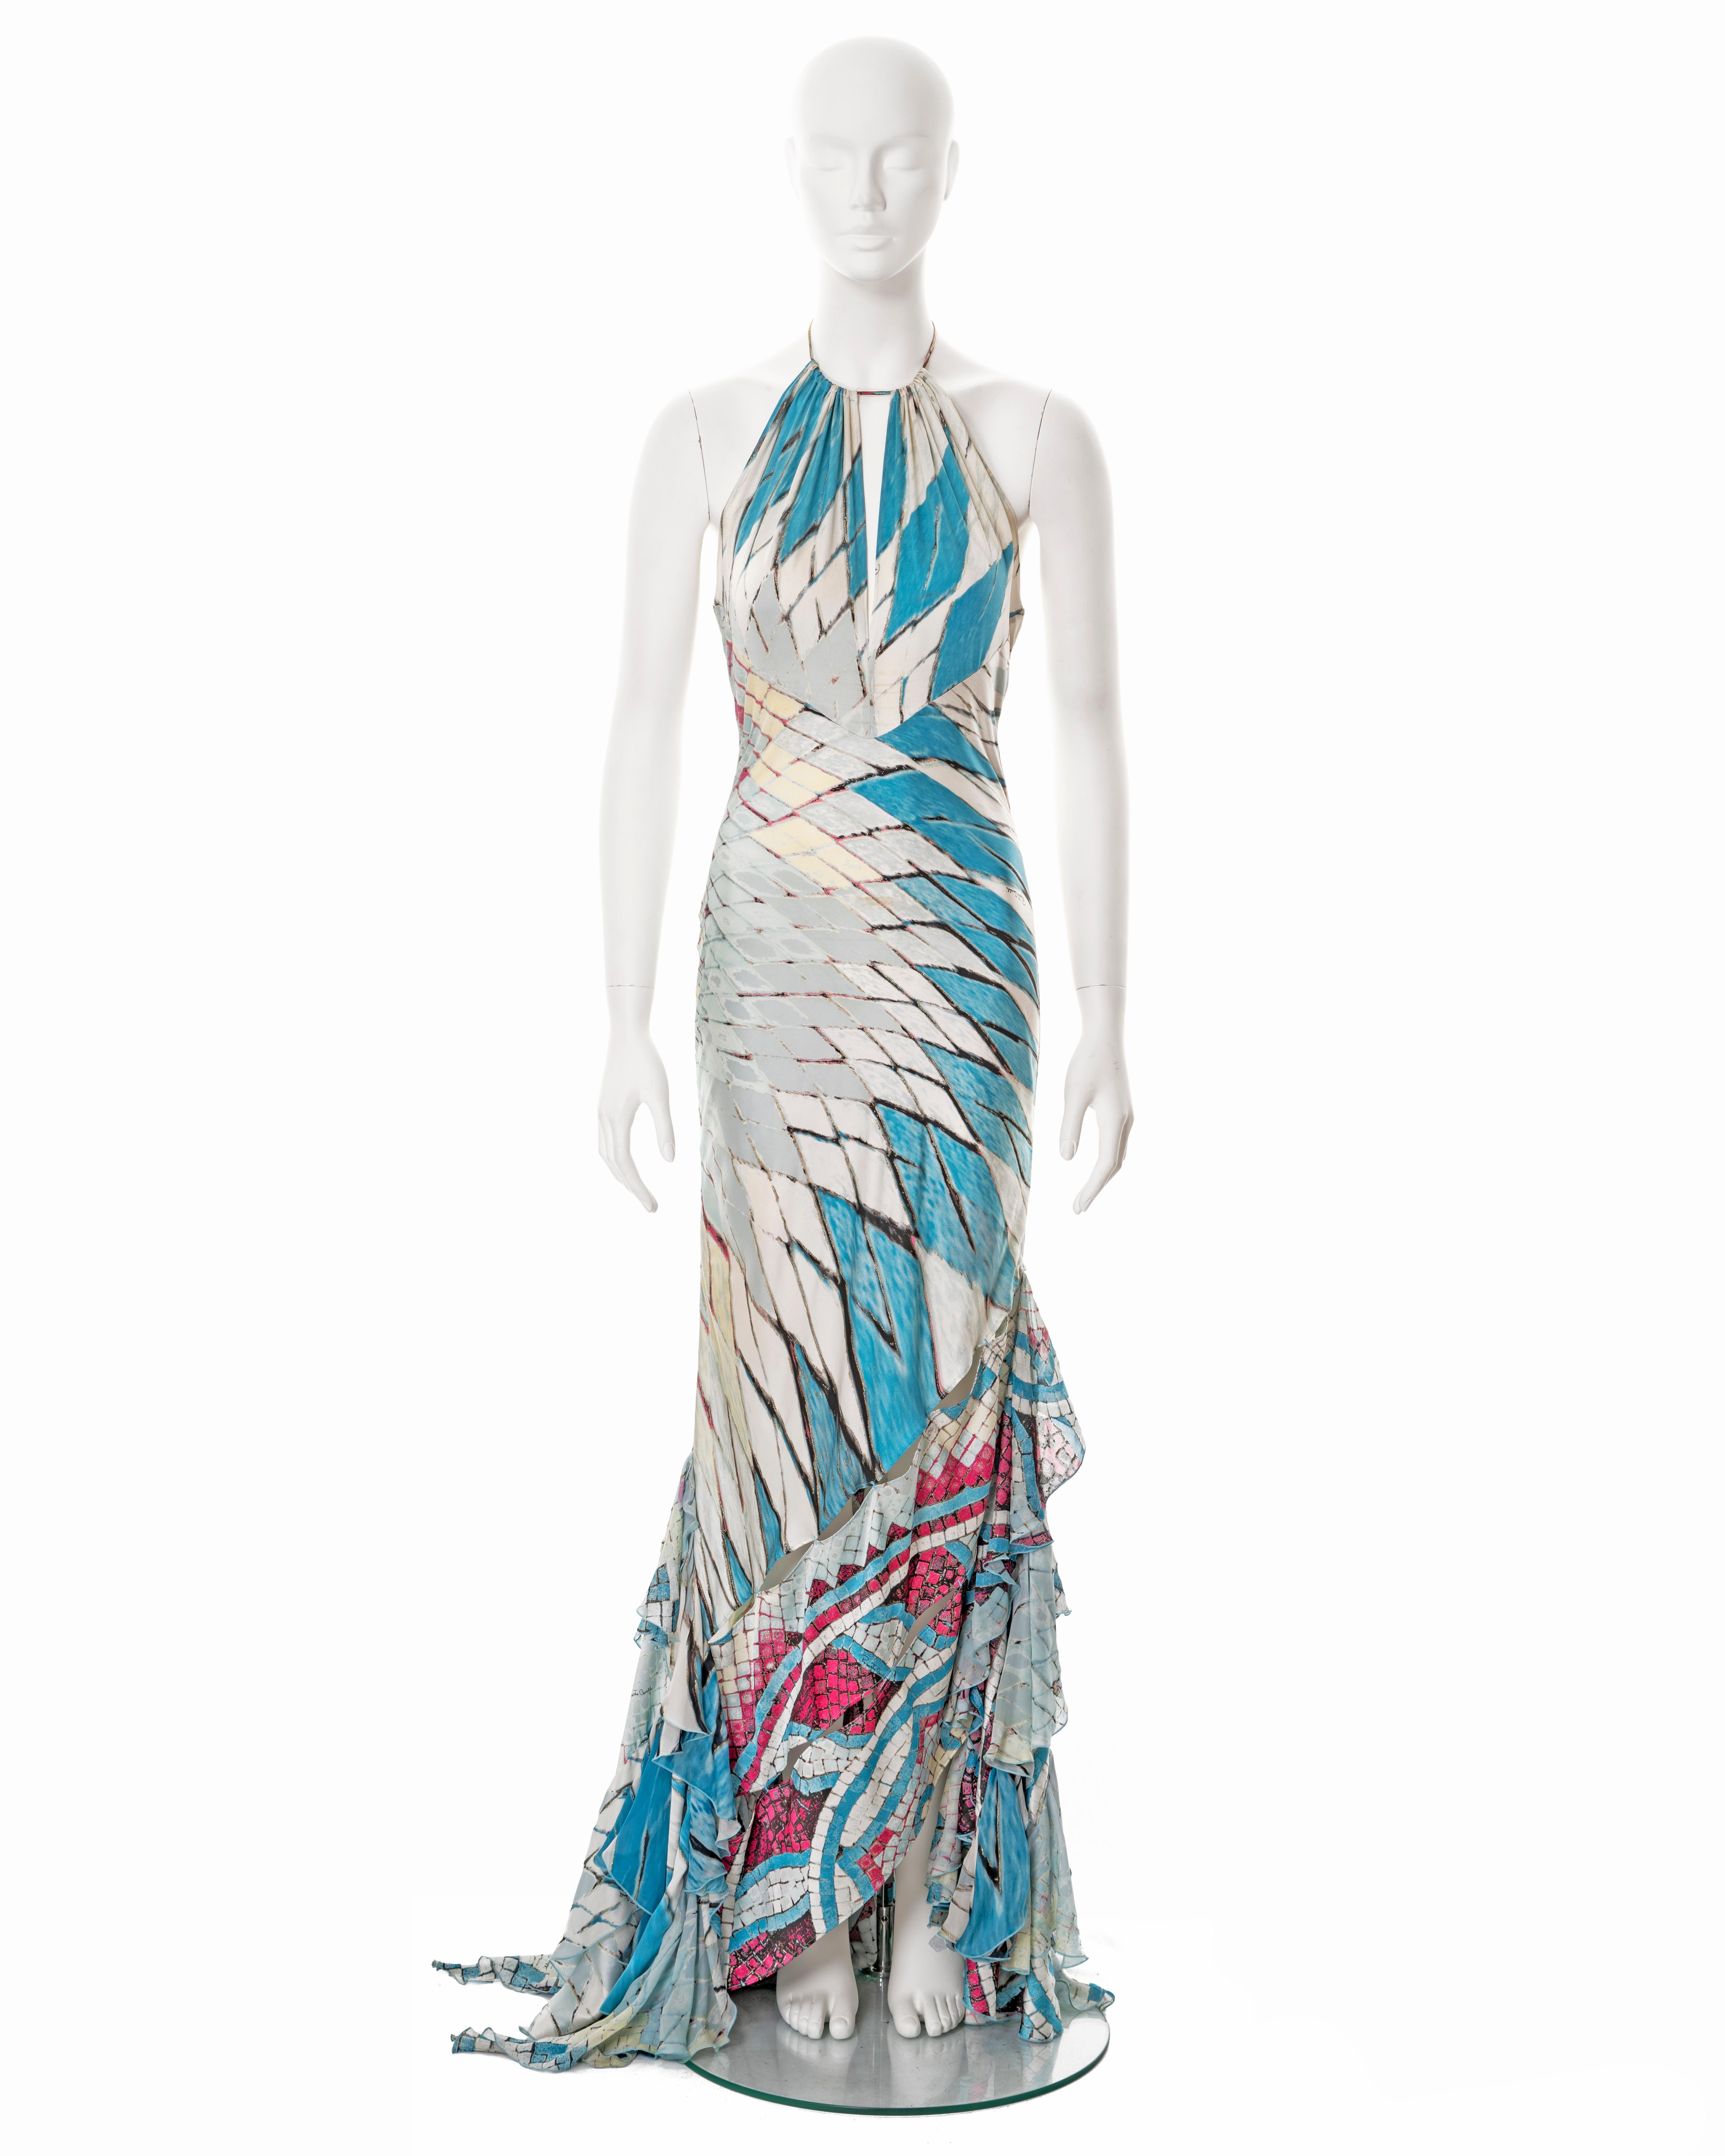 ▪ Roberto Cavalli evening dress
▪ Sold by One of a Kind Archive
▪ Spring-Summer 2004
▪ Constructed from bias-cut silk with blue, ivory and pink mosaic print 
▪ Halter-neck with string ties and pink feather adornments 
▪ Peek-a-boo neckline
▪